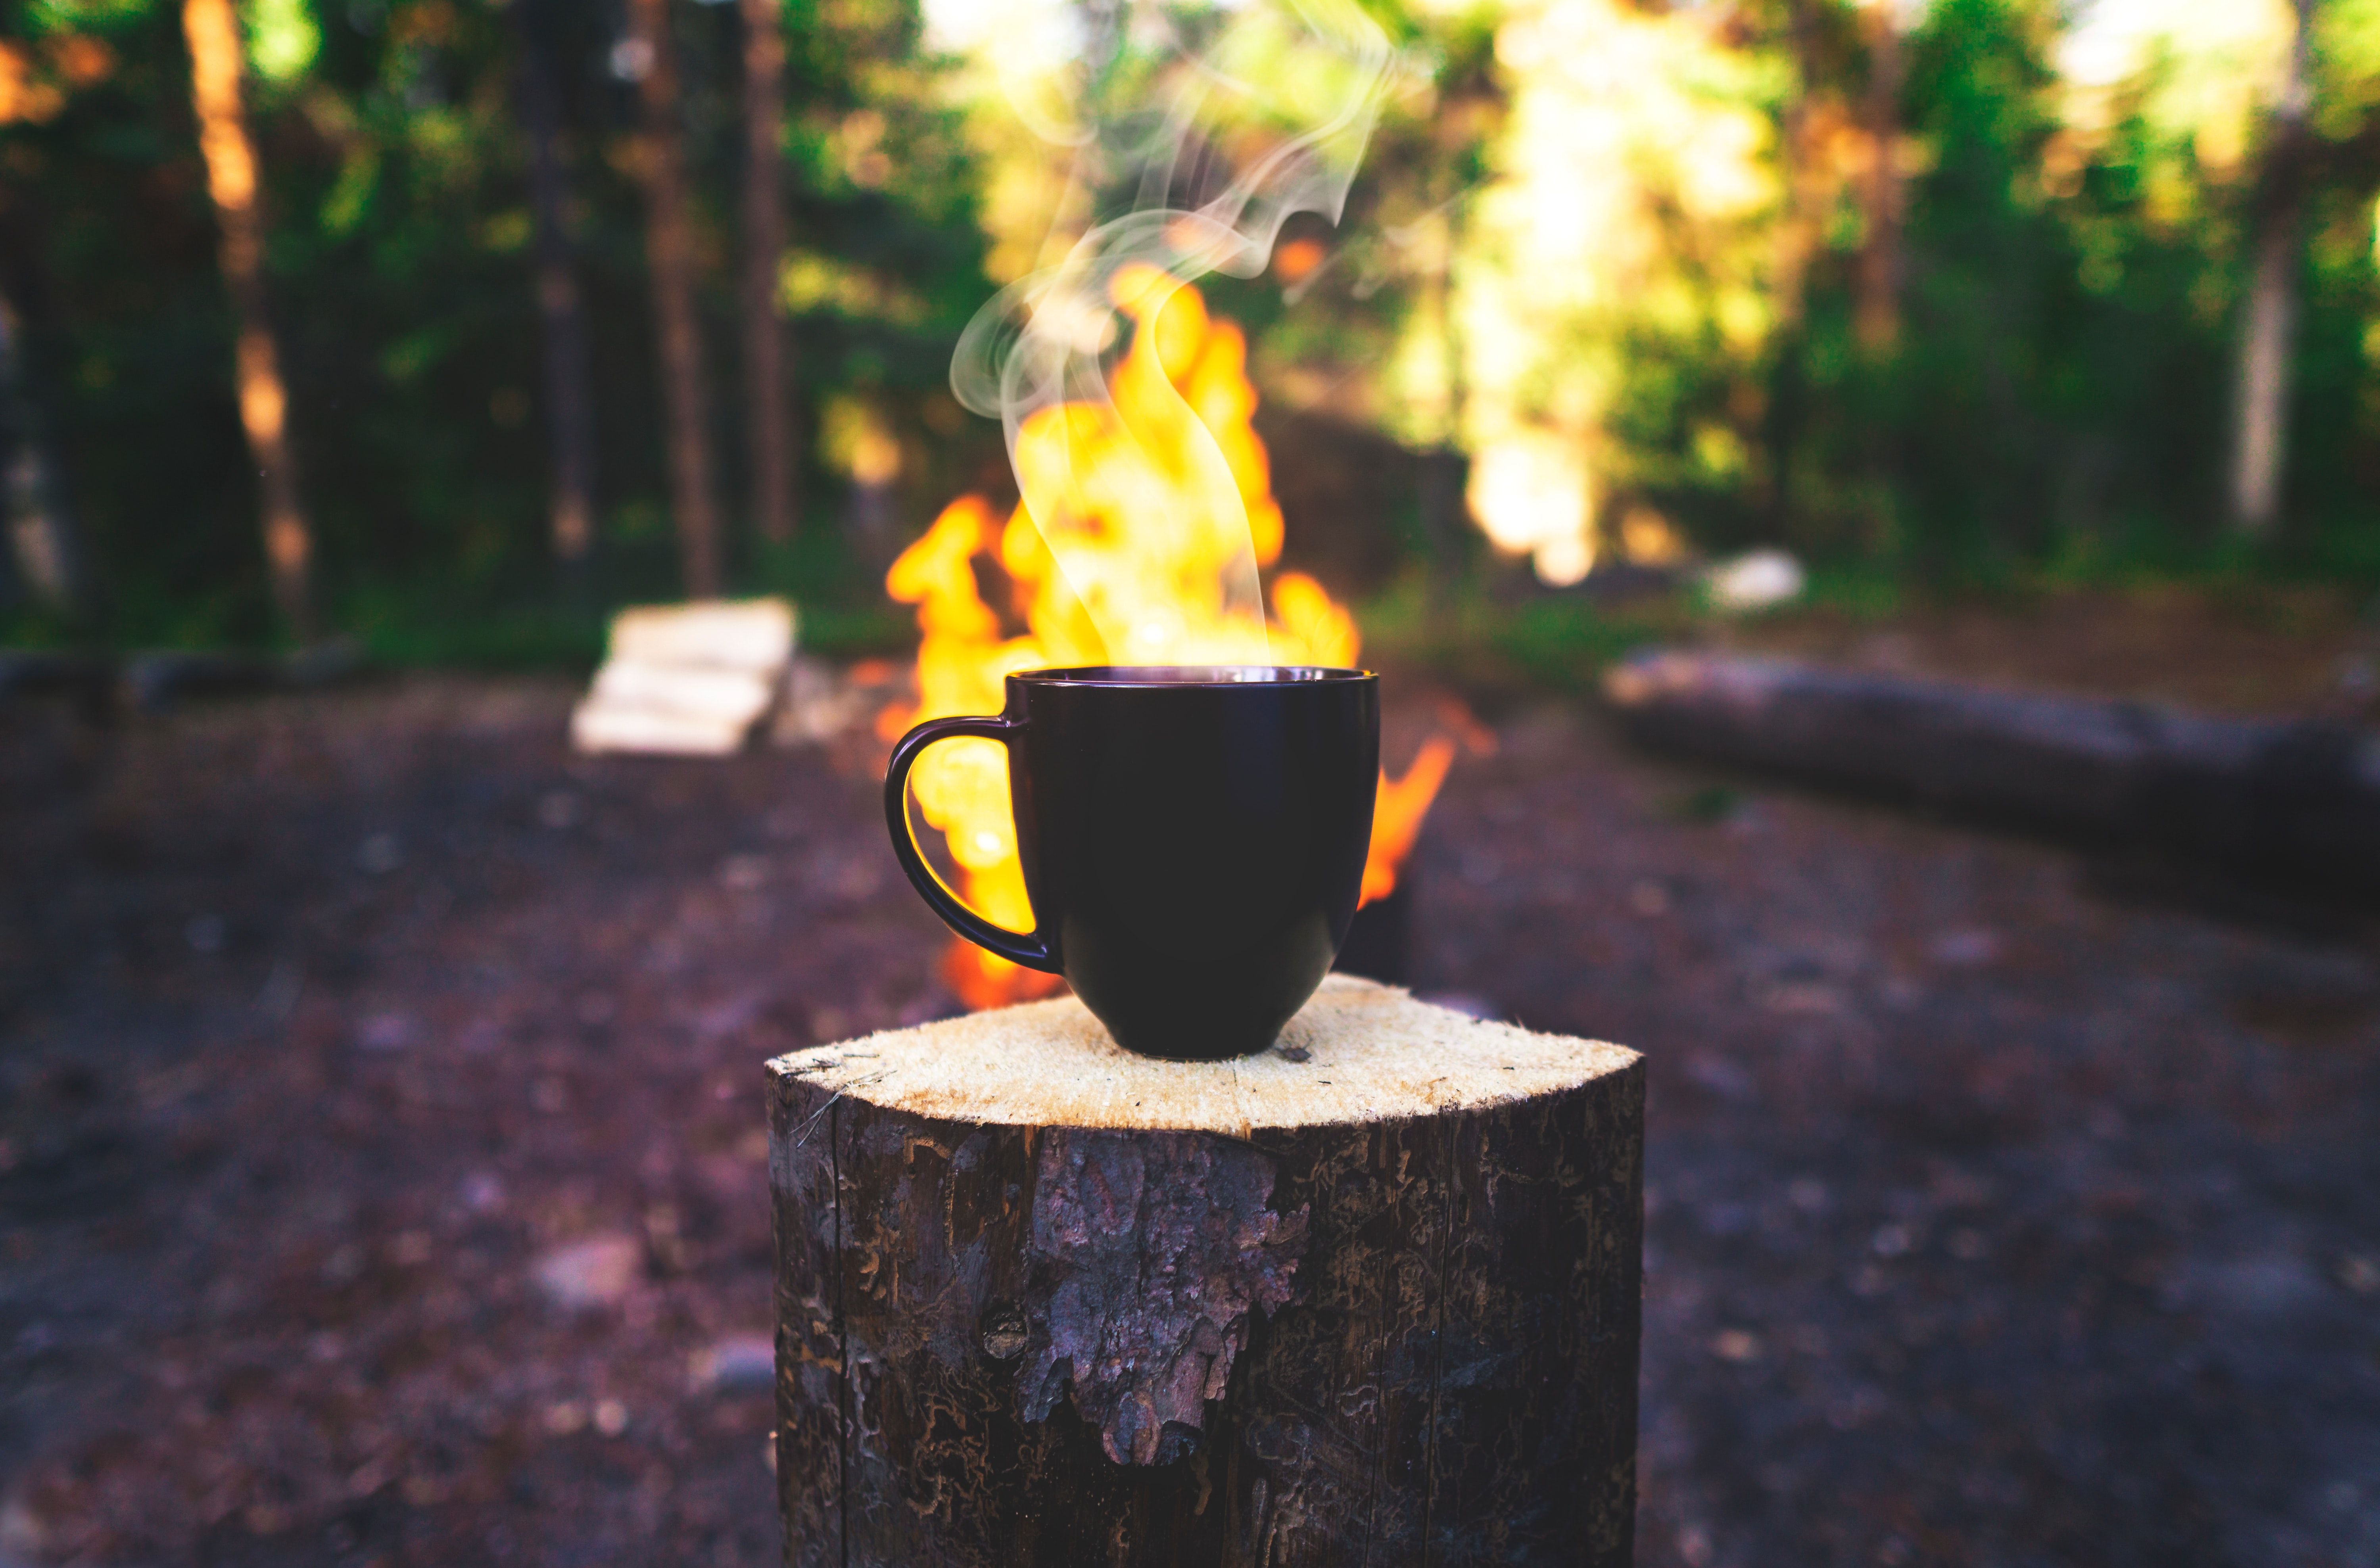 Mobile wallpaper: Bonfire, Miscellanea, Miscellaneous, Mug, Steam, Cup, Drink, Campsite, Beverage, Camping, 104928 download the picture for free